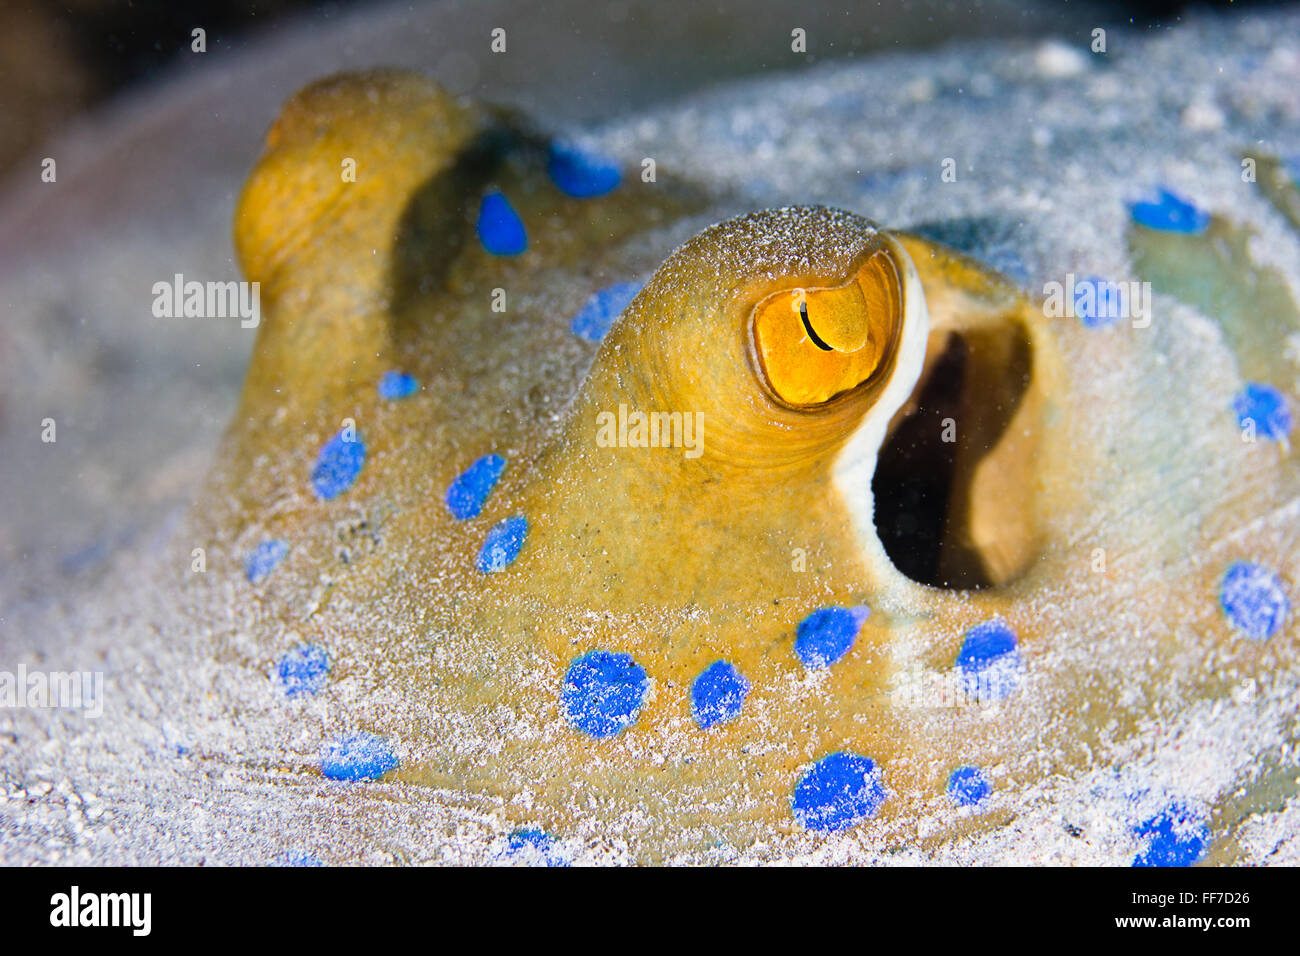 Close-up detailing the beautiful blue spots and gold-flecked eyes of a Blue-spotted Stingray. Stock Photo